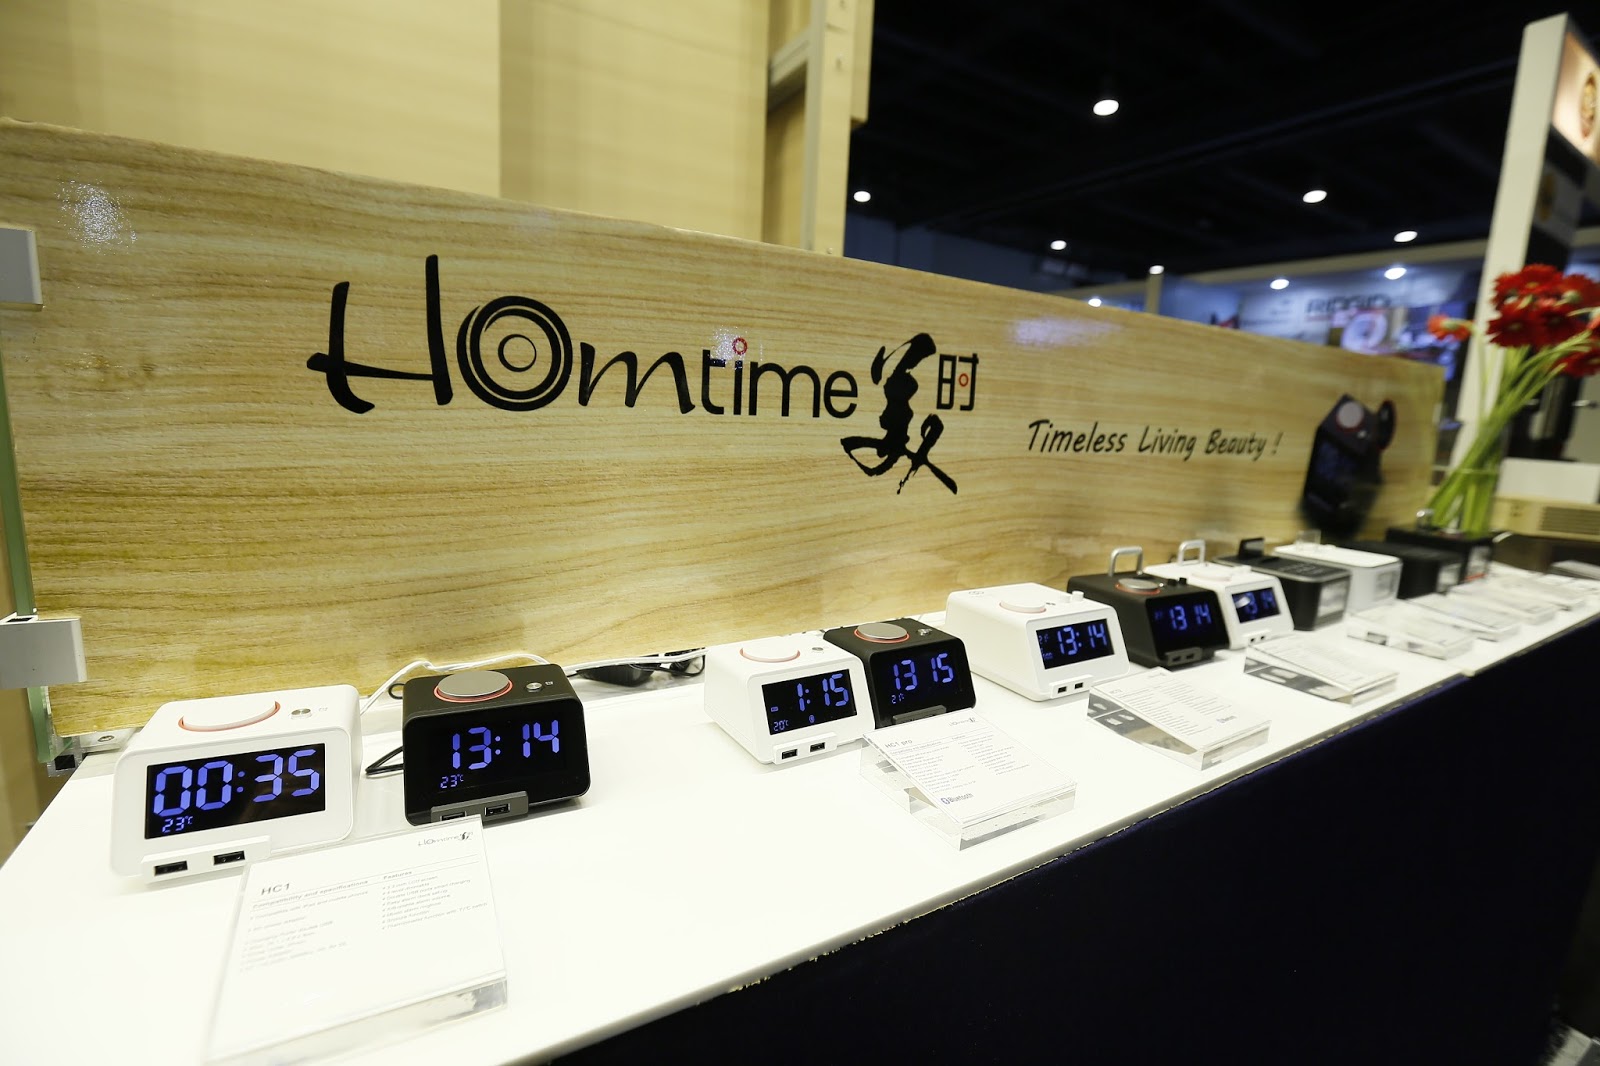 Homtime Digital Alarm Clock, Our New Ultimate Bedside Companion - The